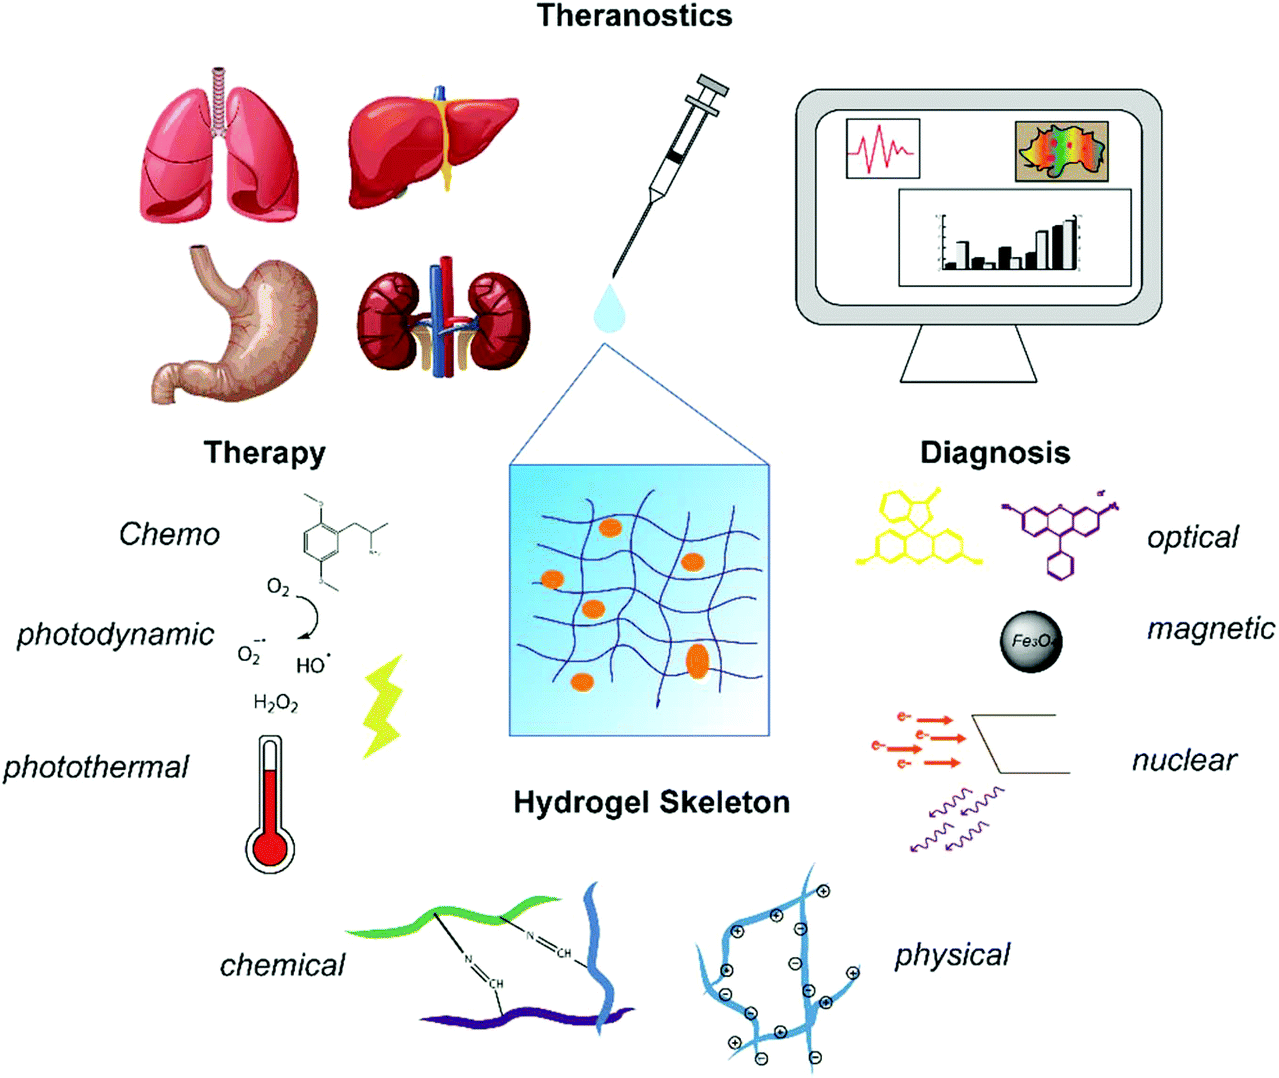 Cancer theranostic platforms based on injectable polymer hydrogels 